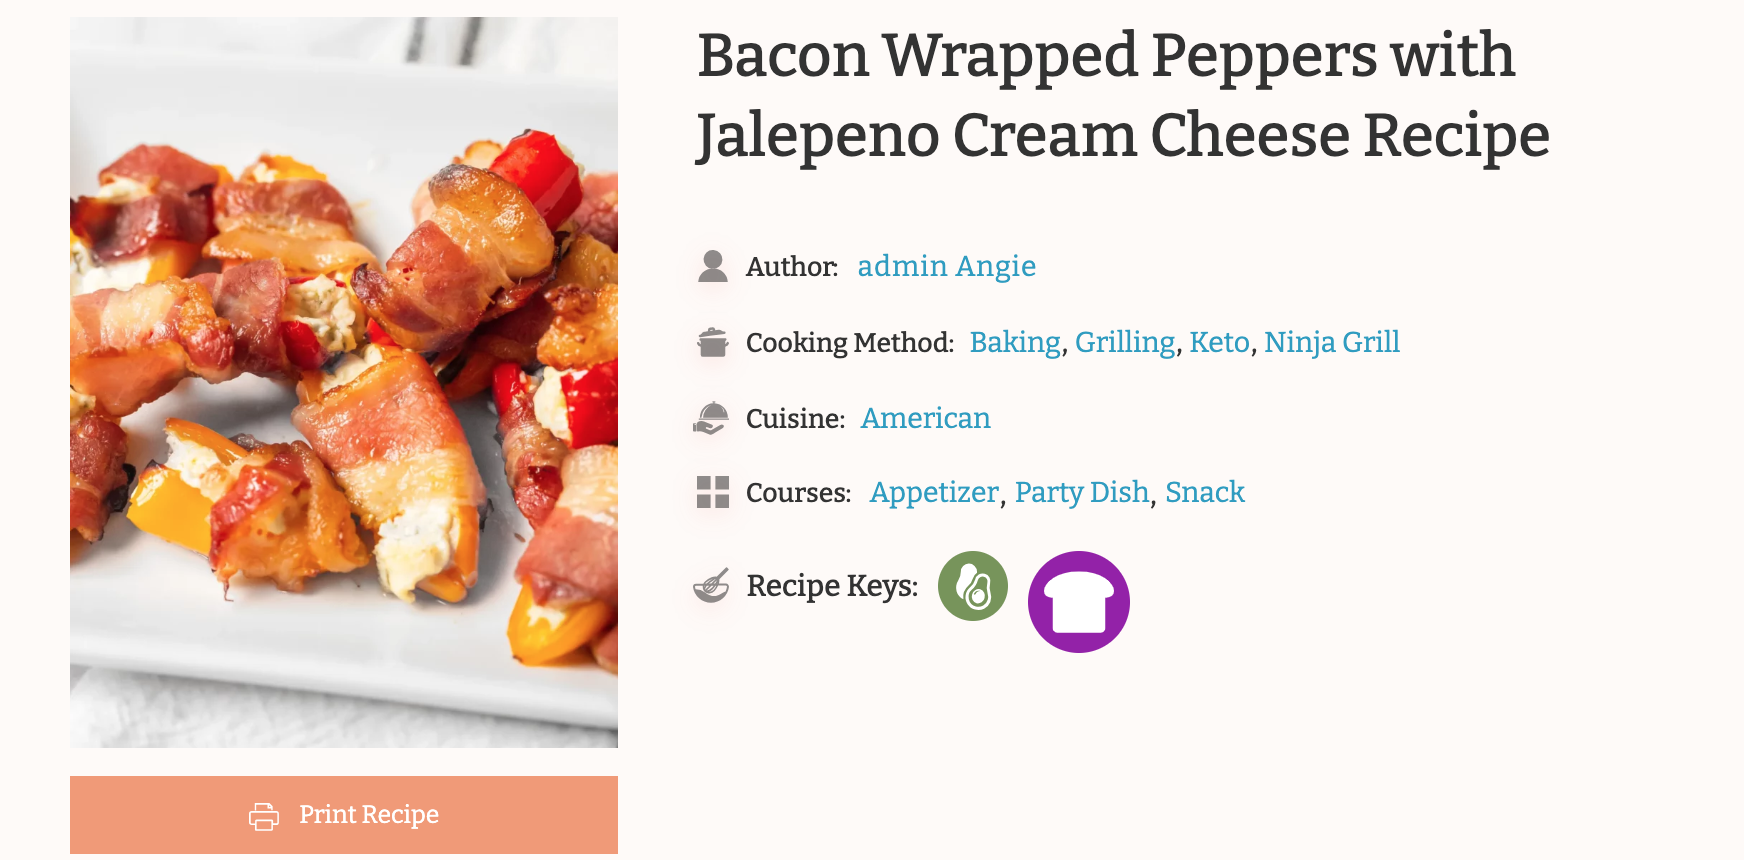 Bacon Wrapped Peppers with Jalepeno Cream Cheese Recipe